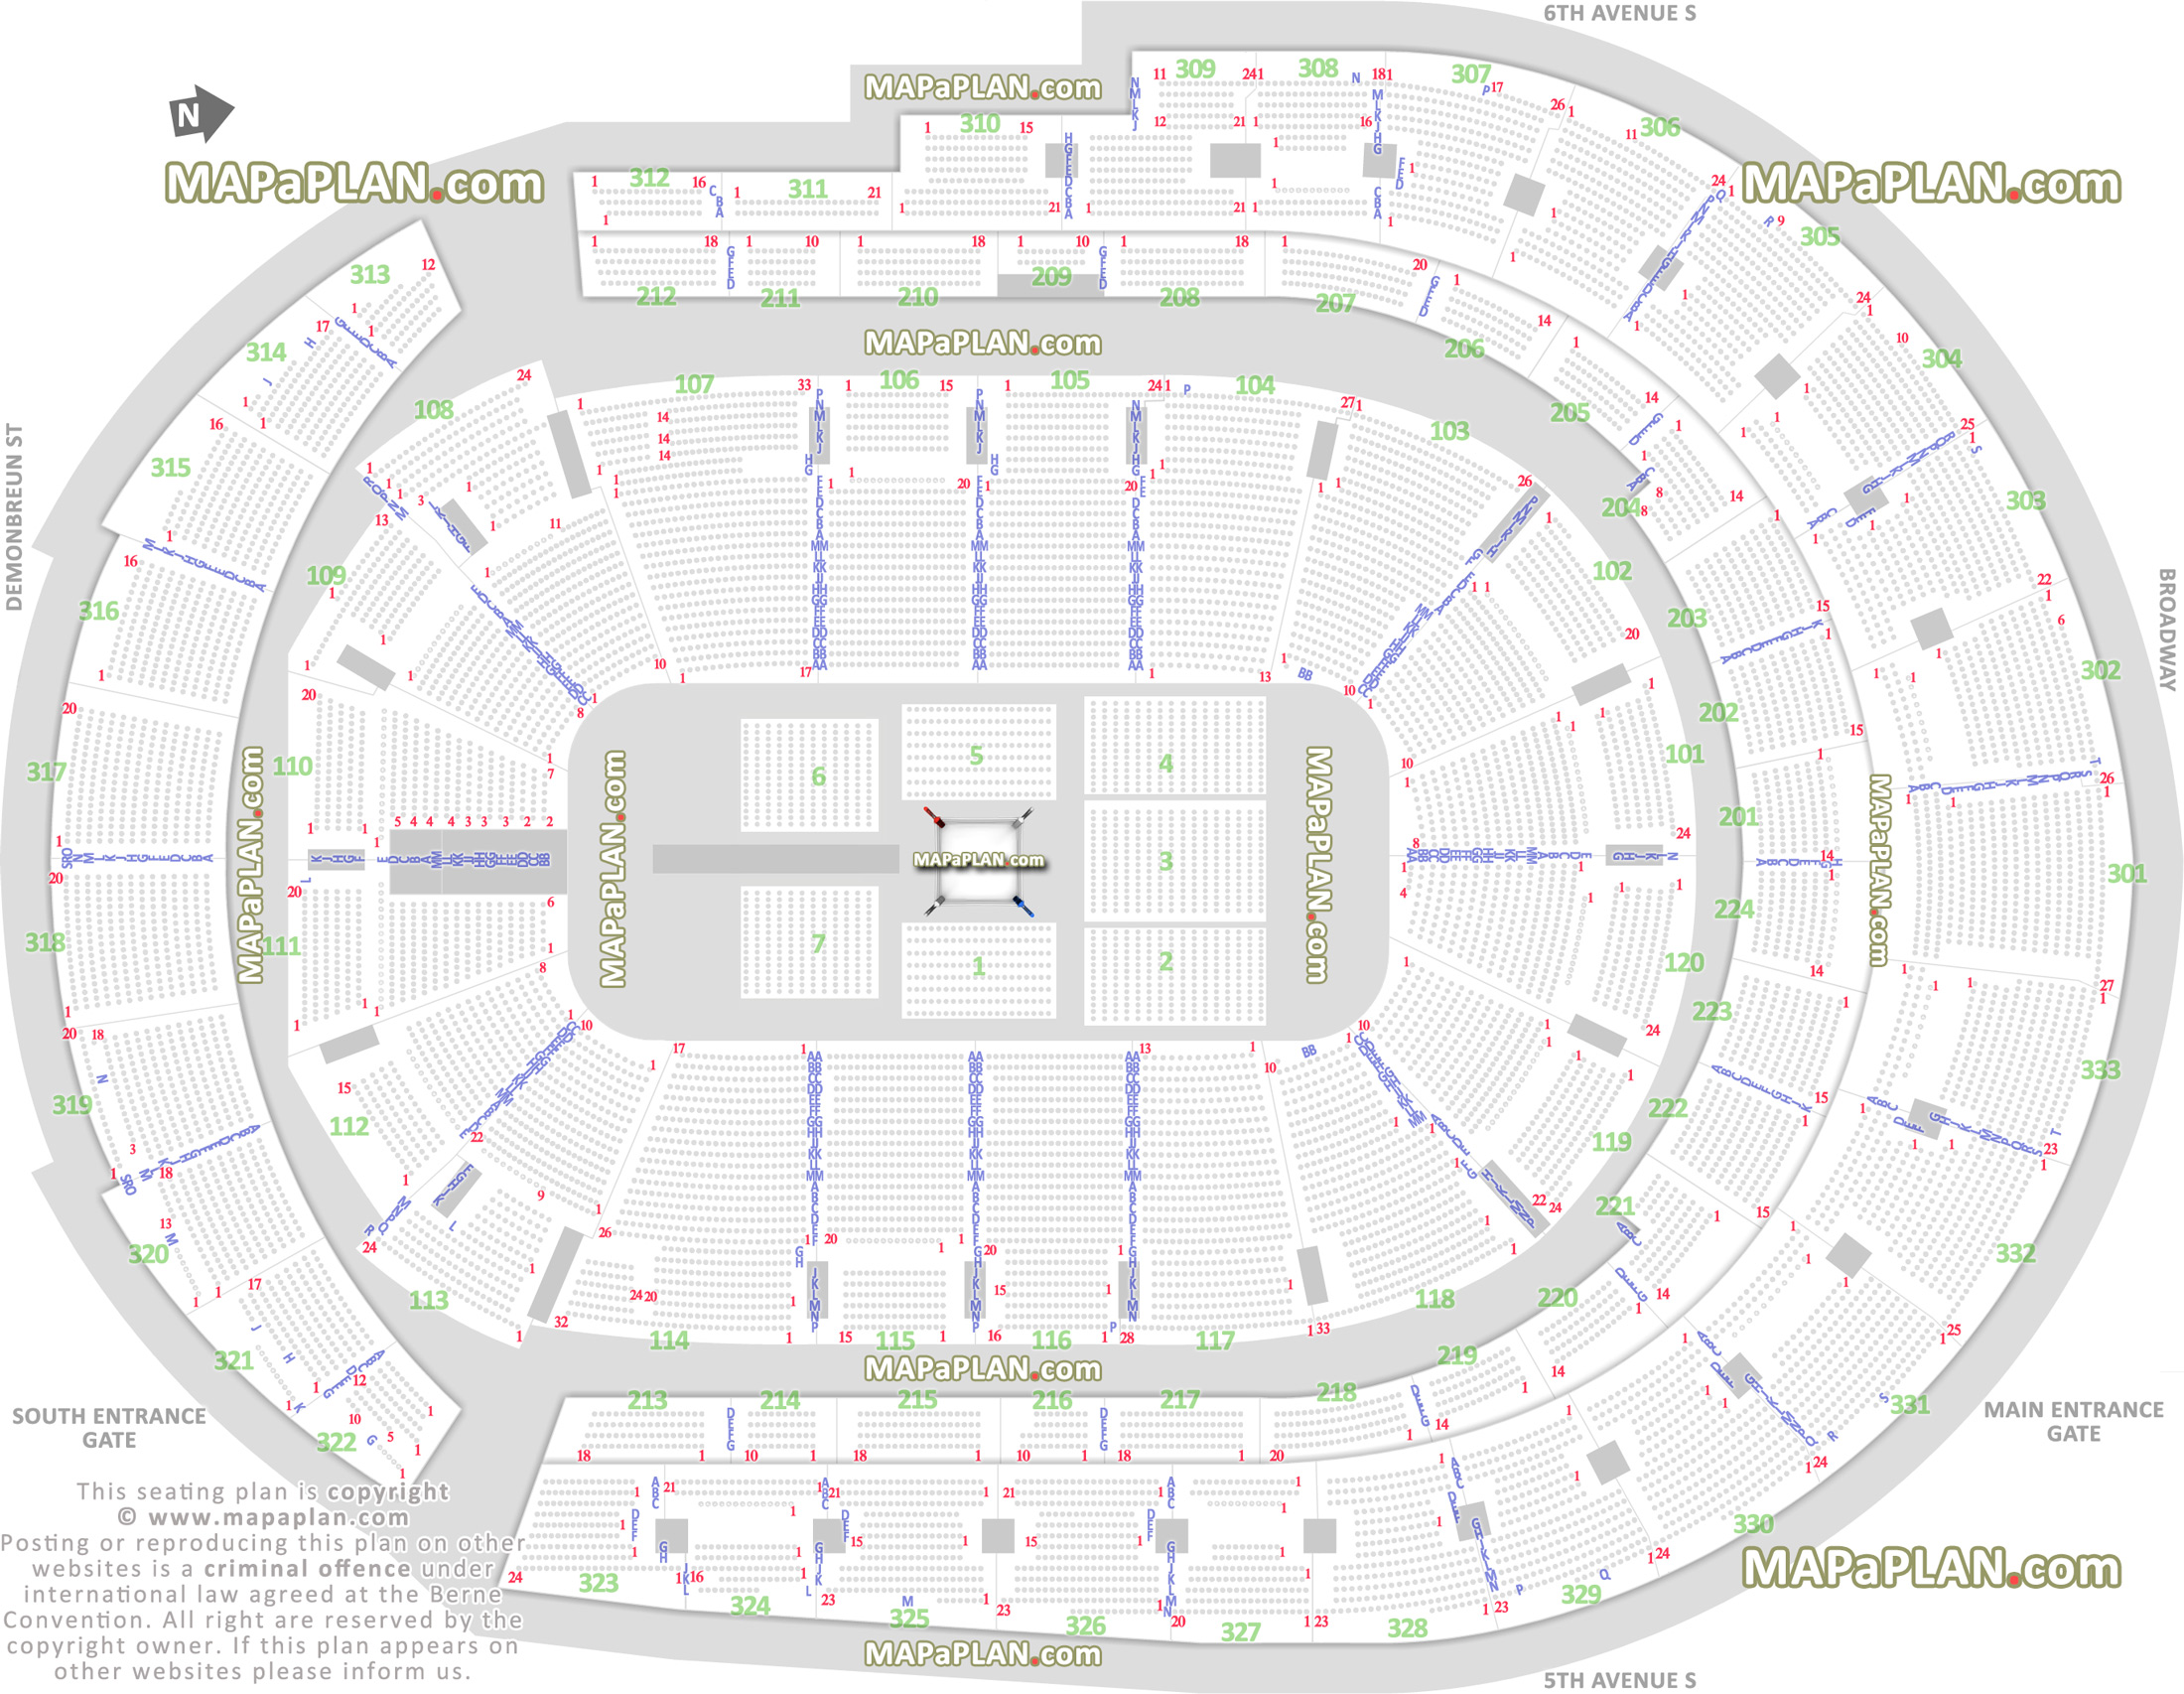 wwe raw smackdown live wrestling boxing match events 360 round ring configuration sro standing room rows good bad side seats luxury private sections Nashville Bridgestone Arena seating chart